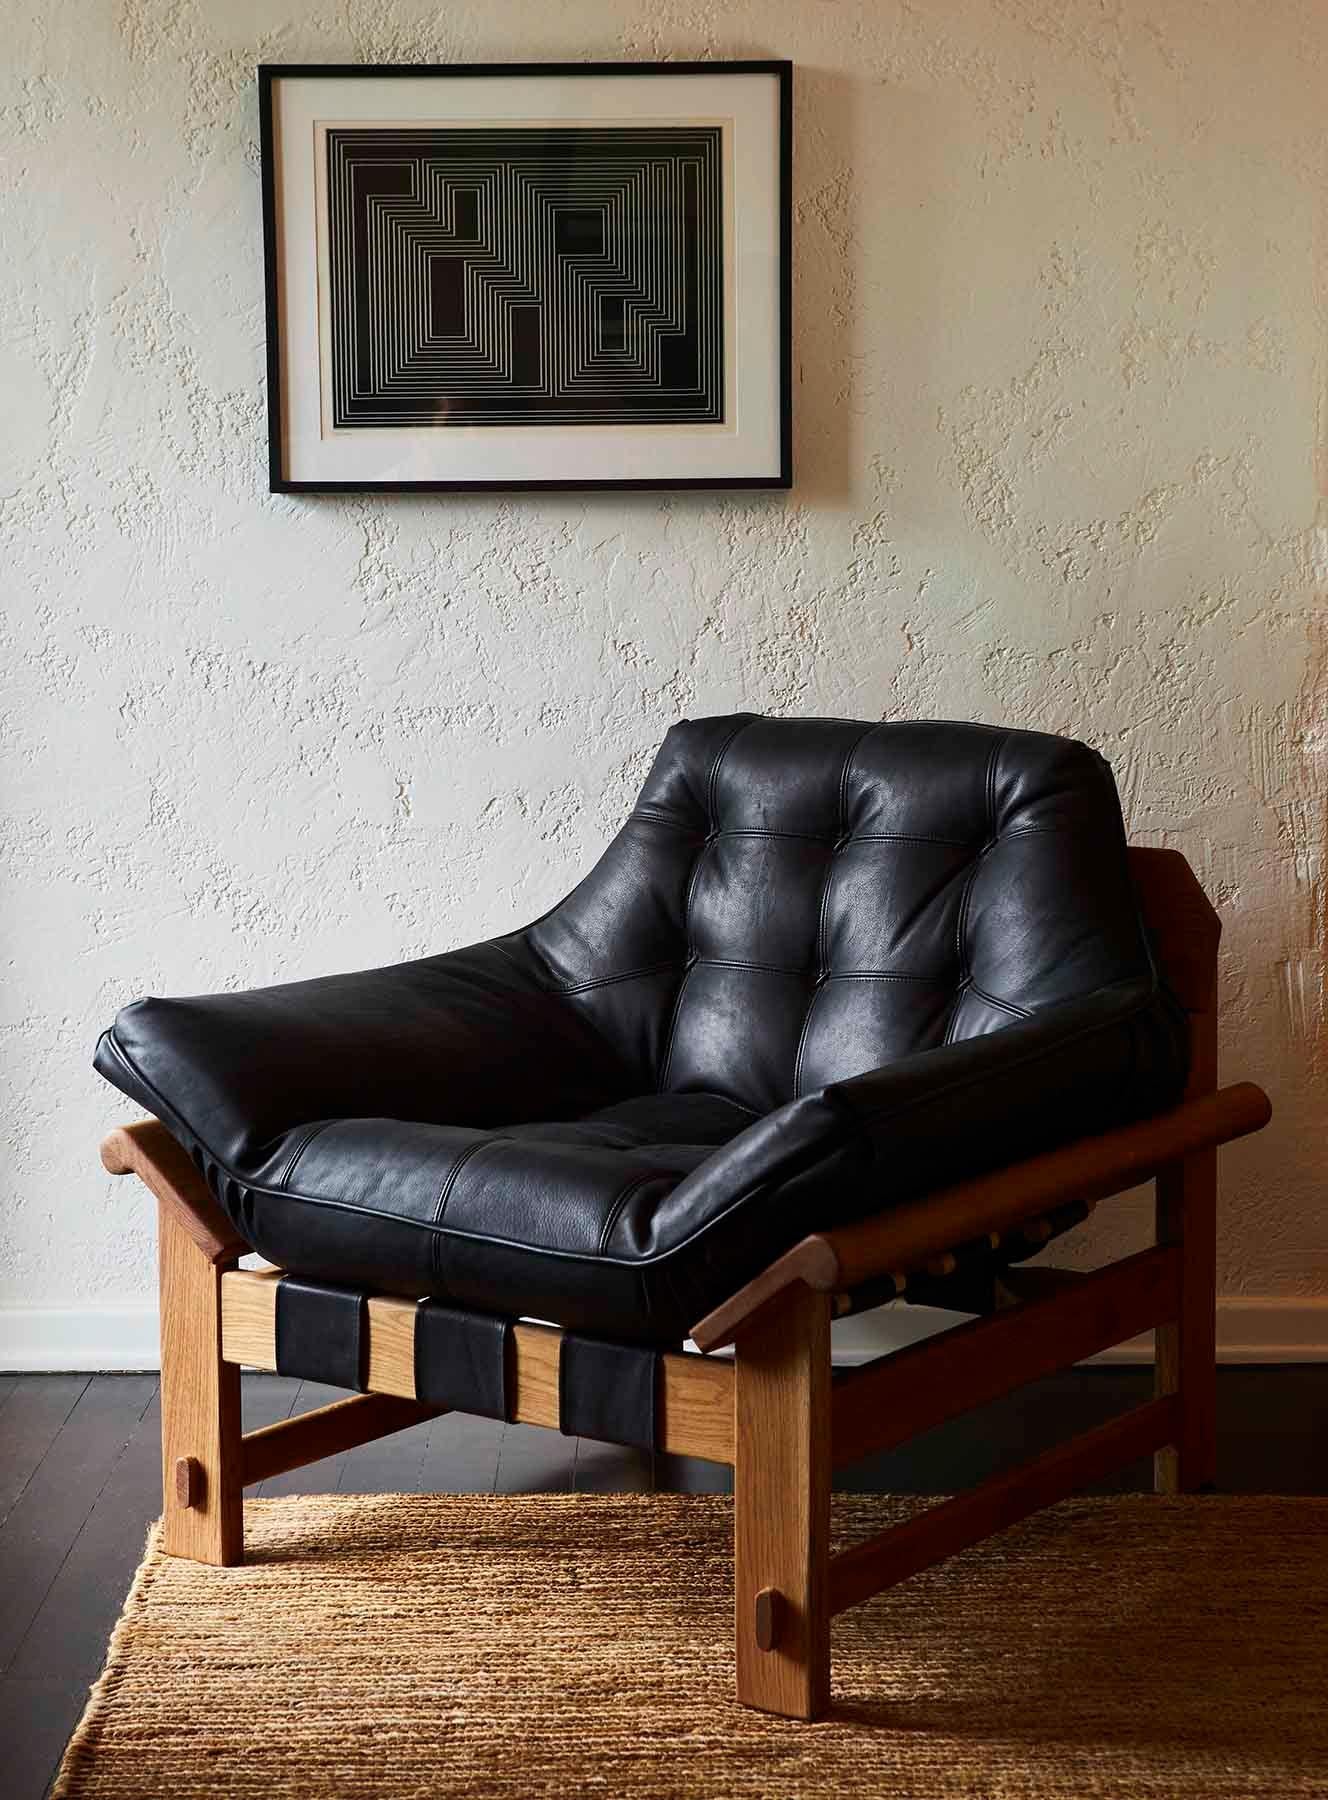 The Ojai lounge chair features a solid white oak or solid walnut base and a single tufted leather cushion with leather straps. 

The Lawson-Fenning Collection is designed and handmade in Los Angeles, California. Reach out to discover what options